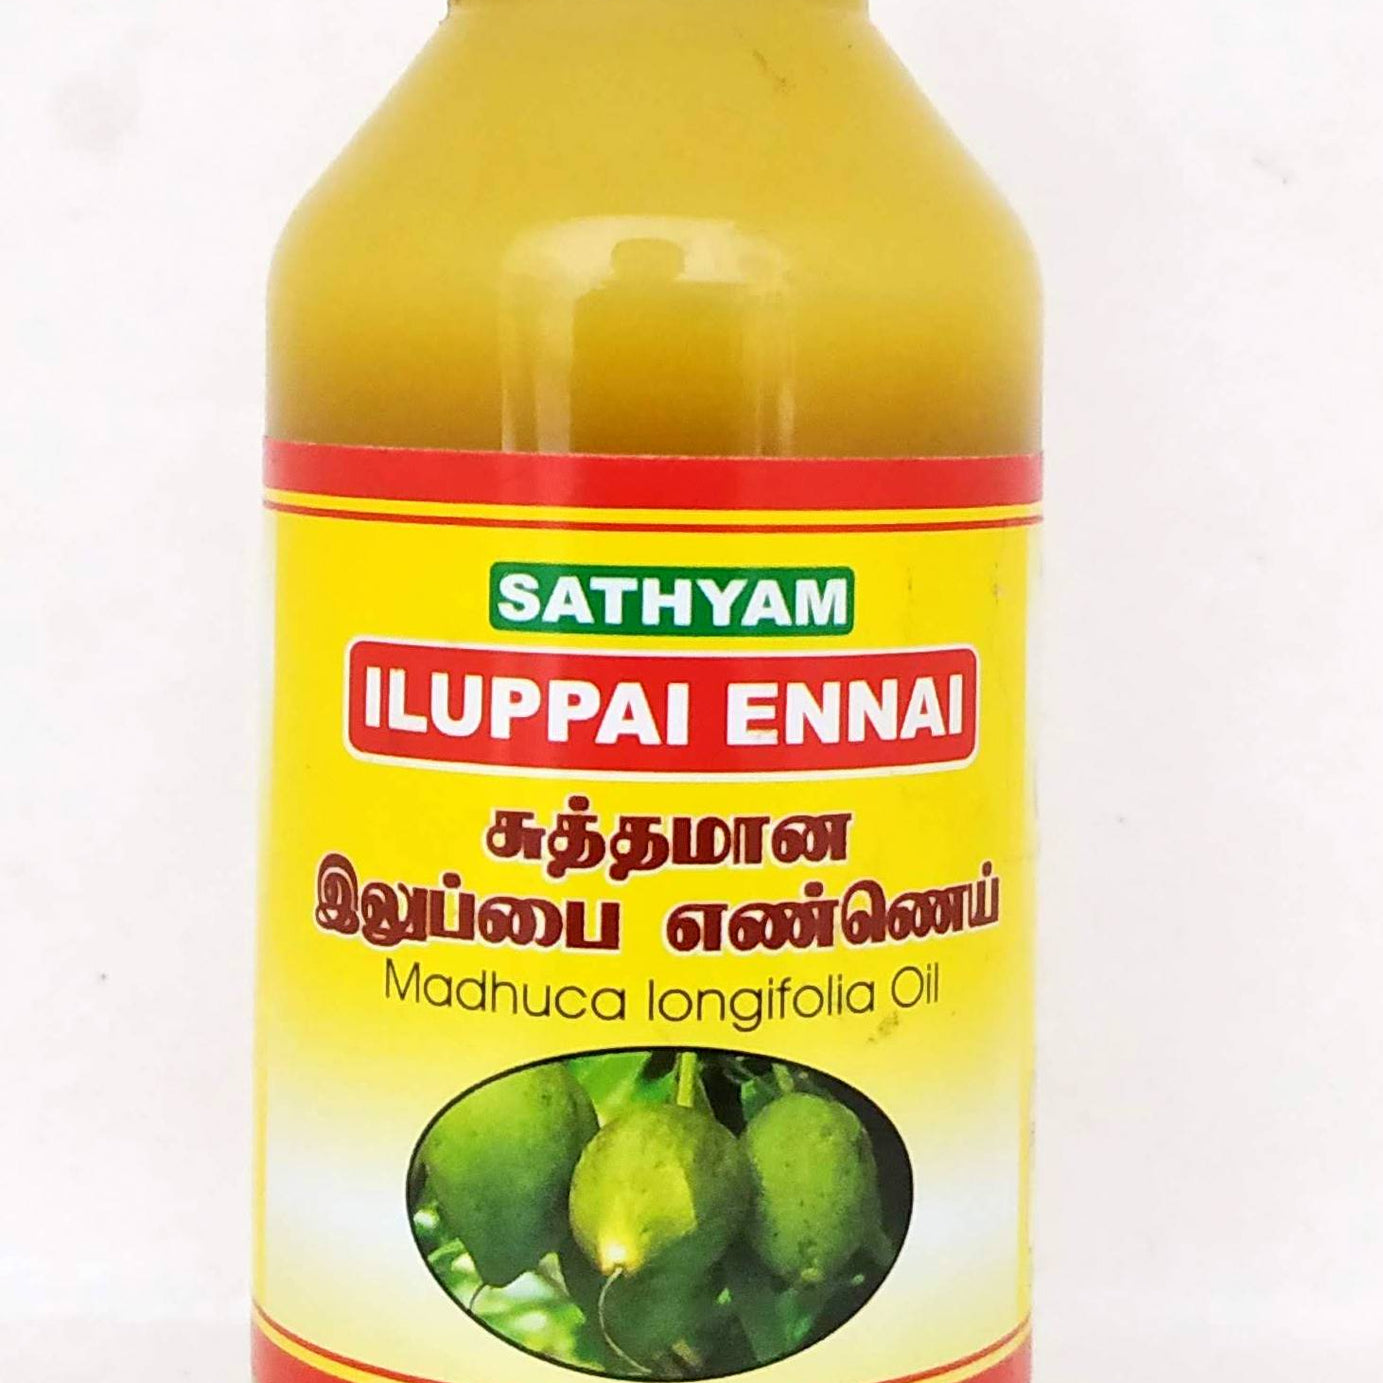 Shop Iluppai ennai 100ml at price 49.00 from Sathyam Herbals Online - Ayush Care